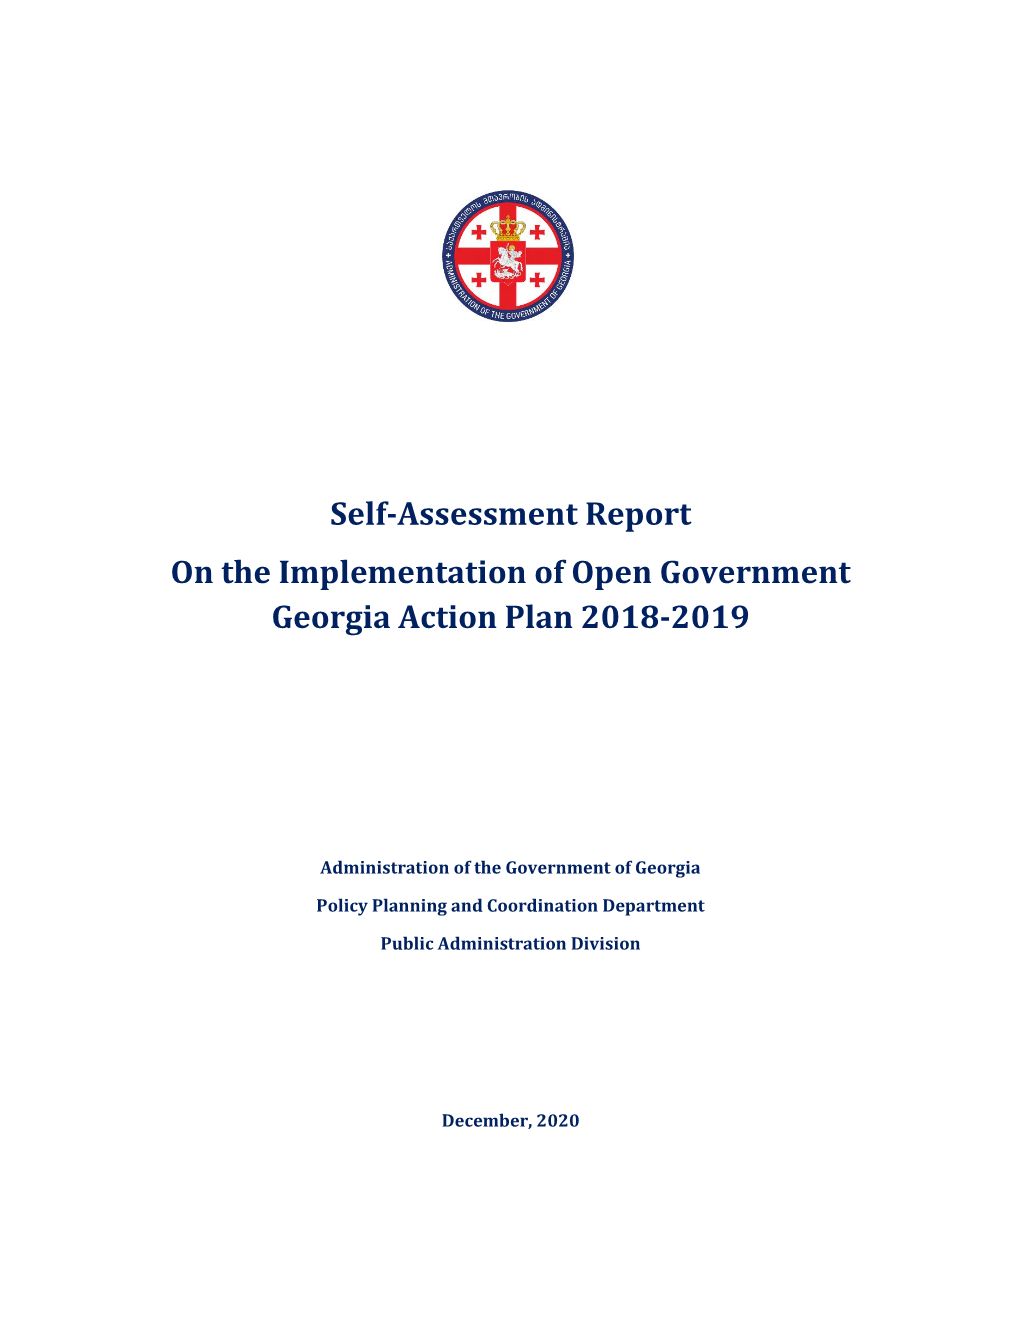 Final Self-Assessment Report on the Implementation of Open